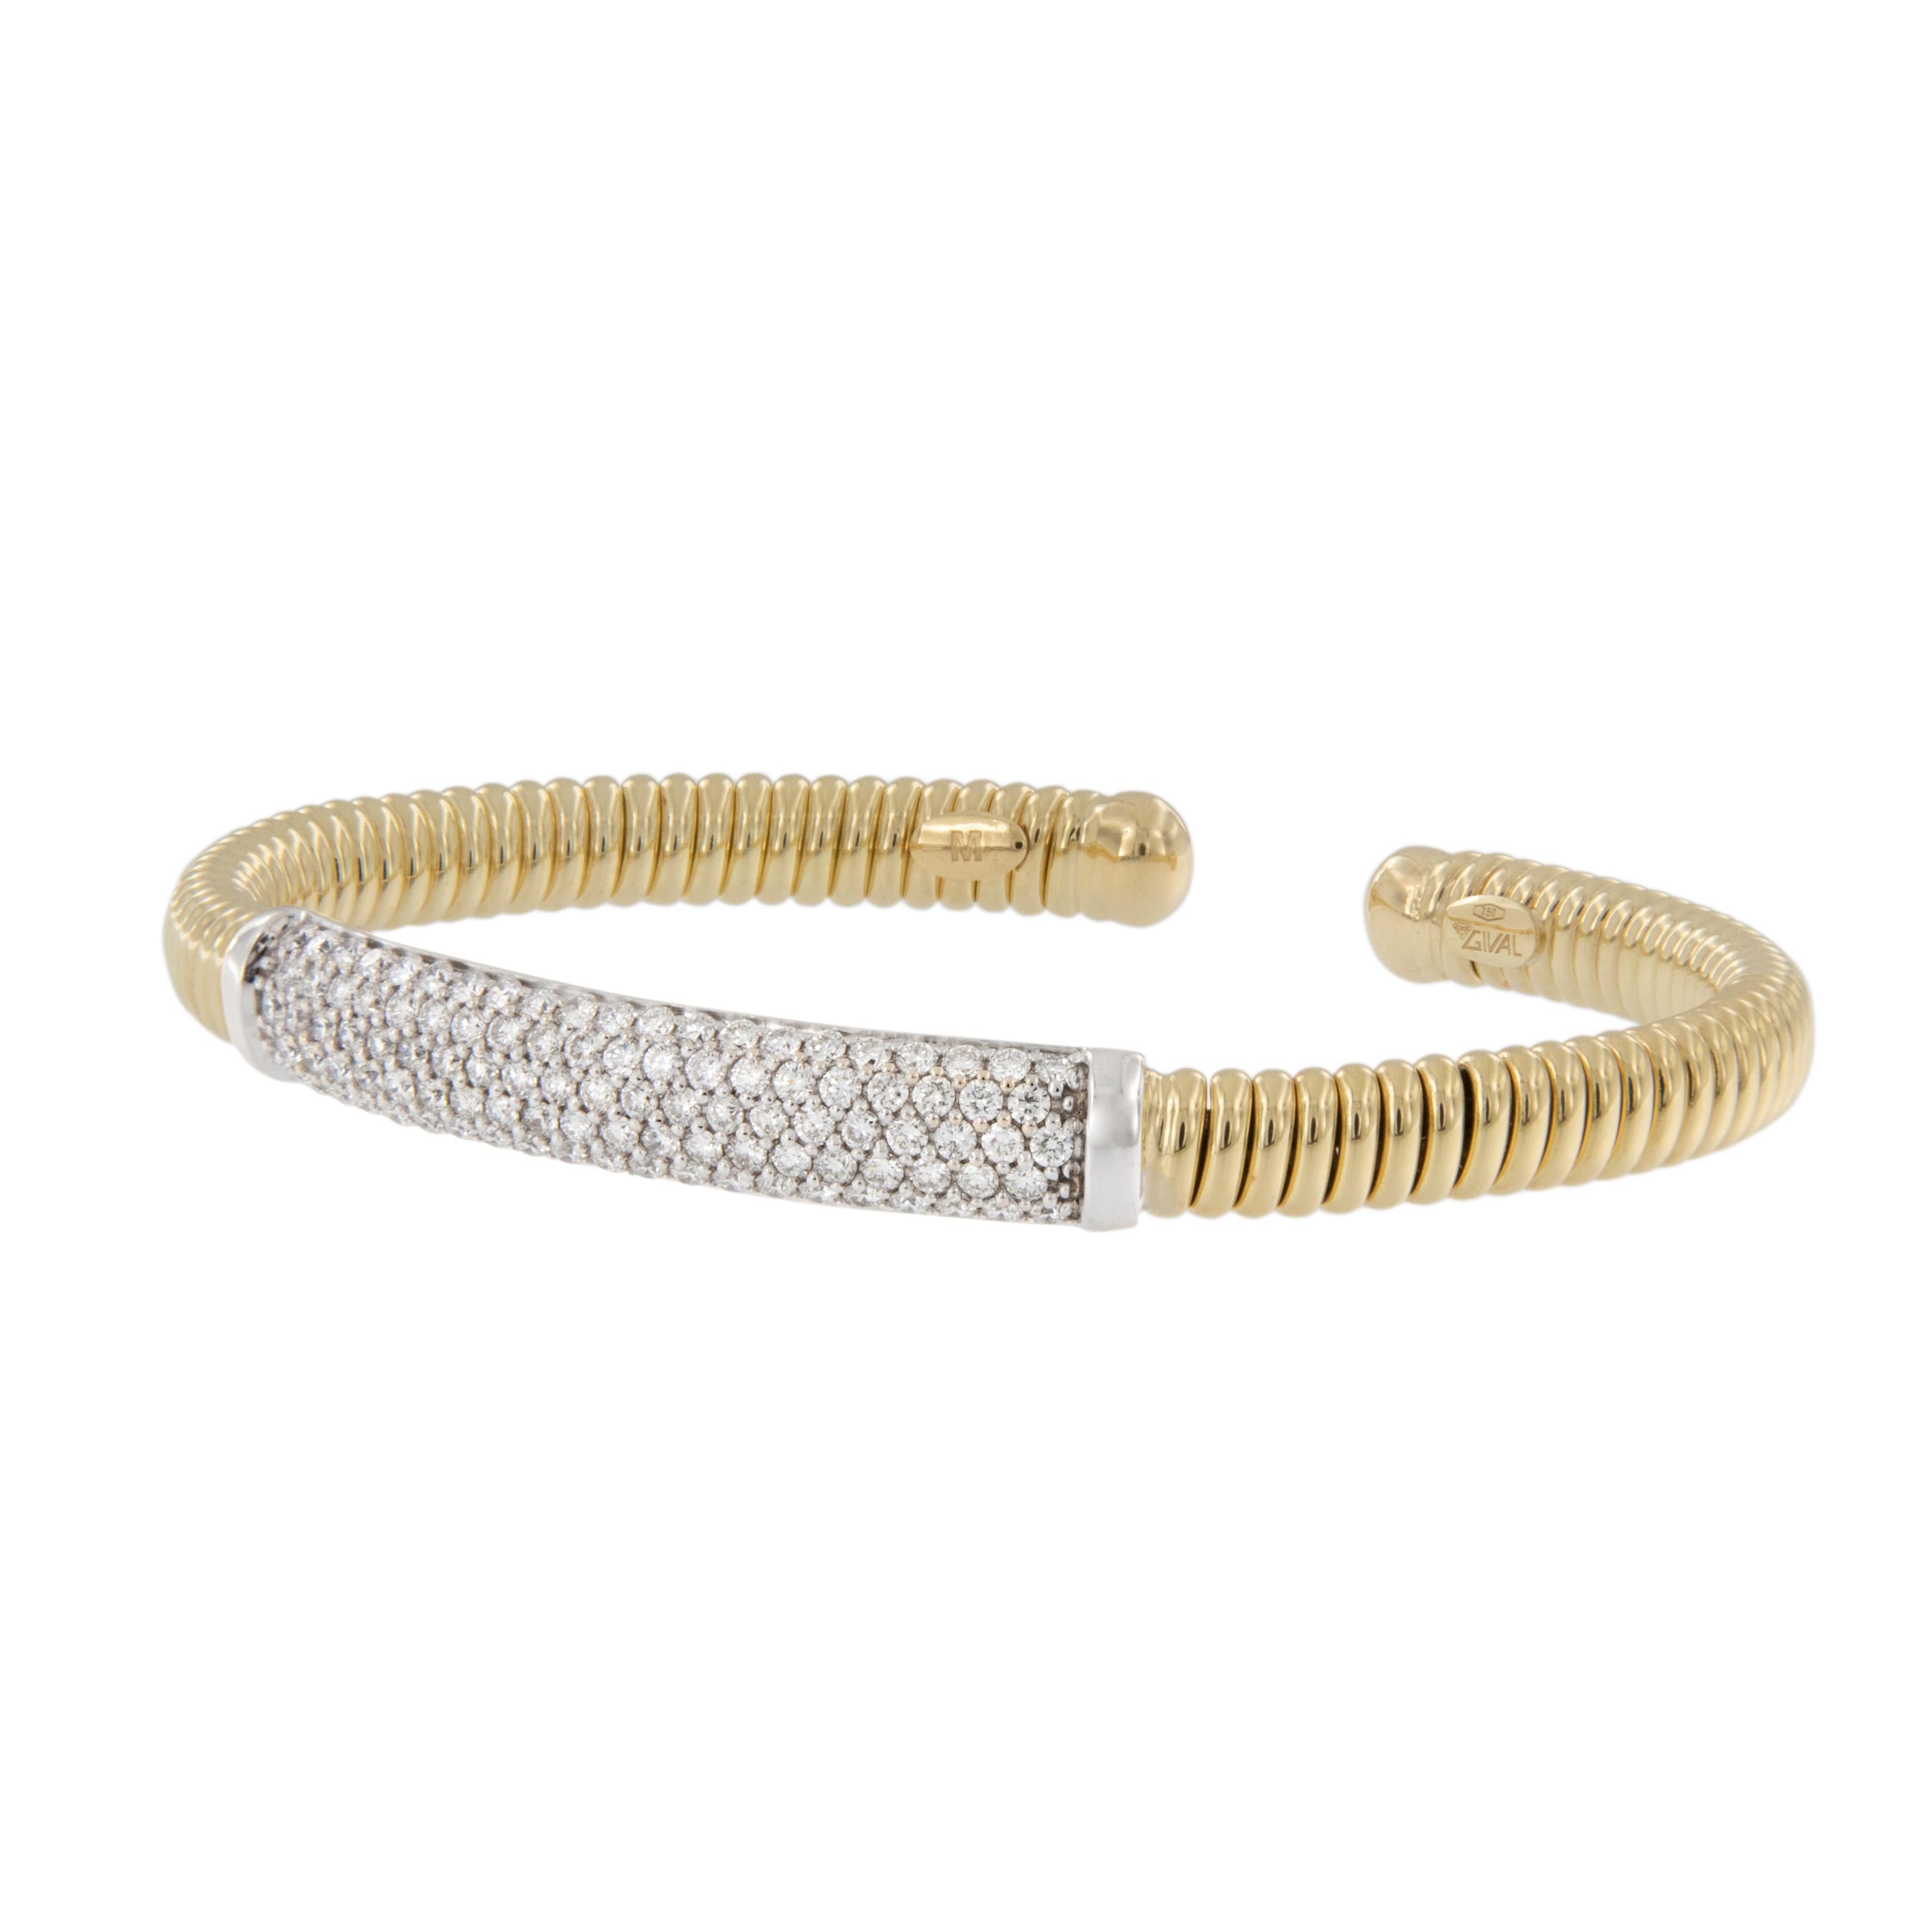 Italian jewelers, known for their fine craftwork created this rich 18 karat yellow gold flexible cuff bracelet with white gold center pave' section featuring 1.70 Cttw diamonds. Beautiful bracelet is so easy to slip on yet is secure on your wrist!